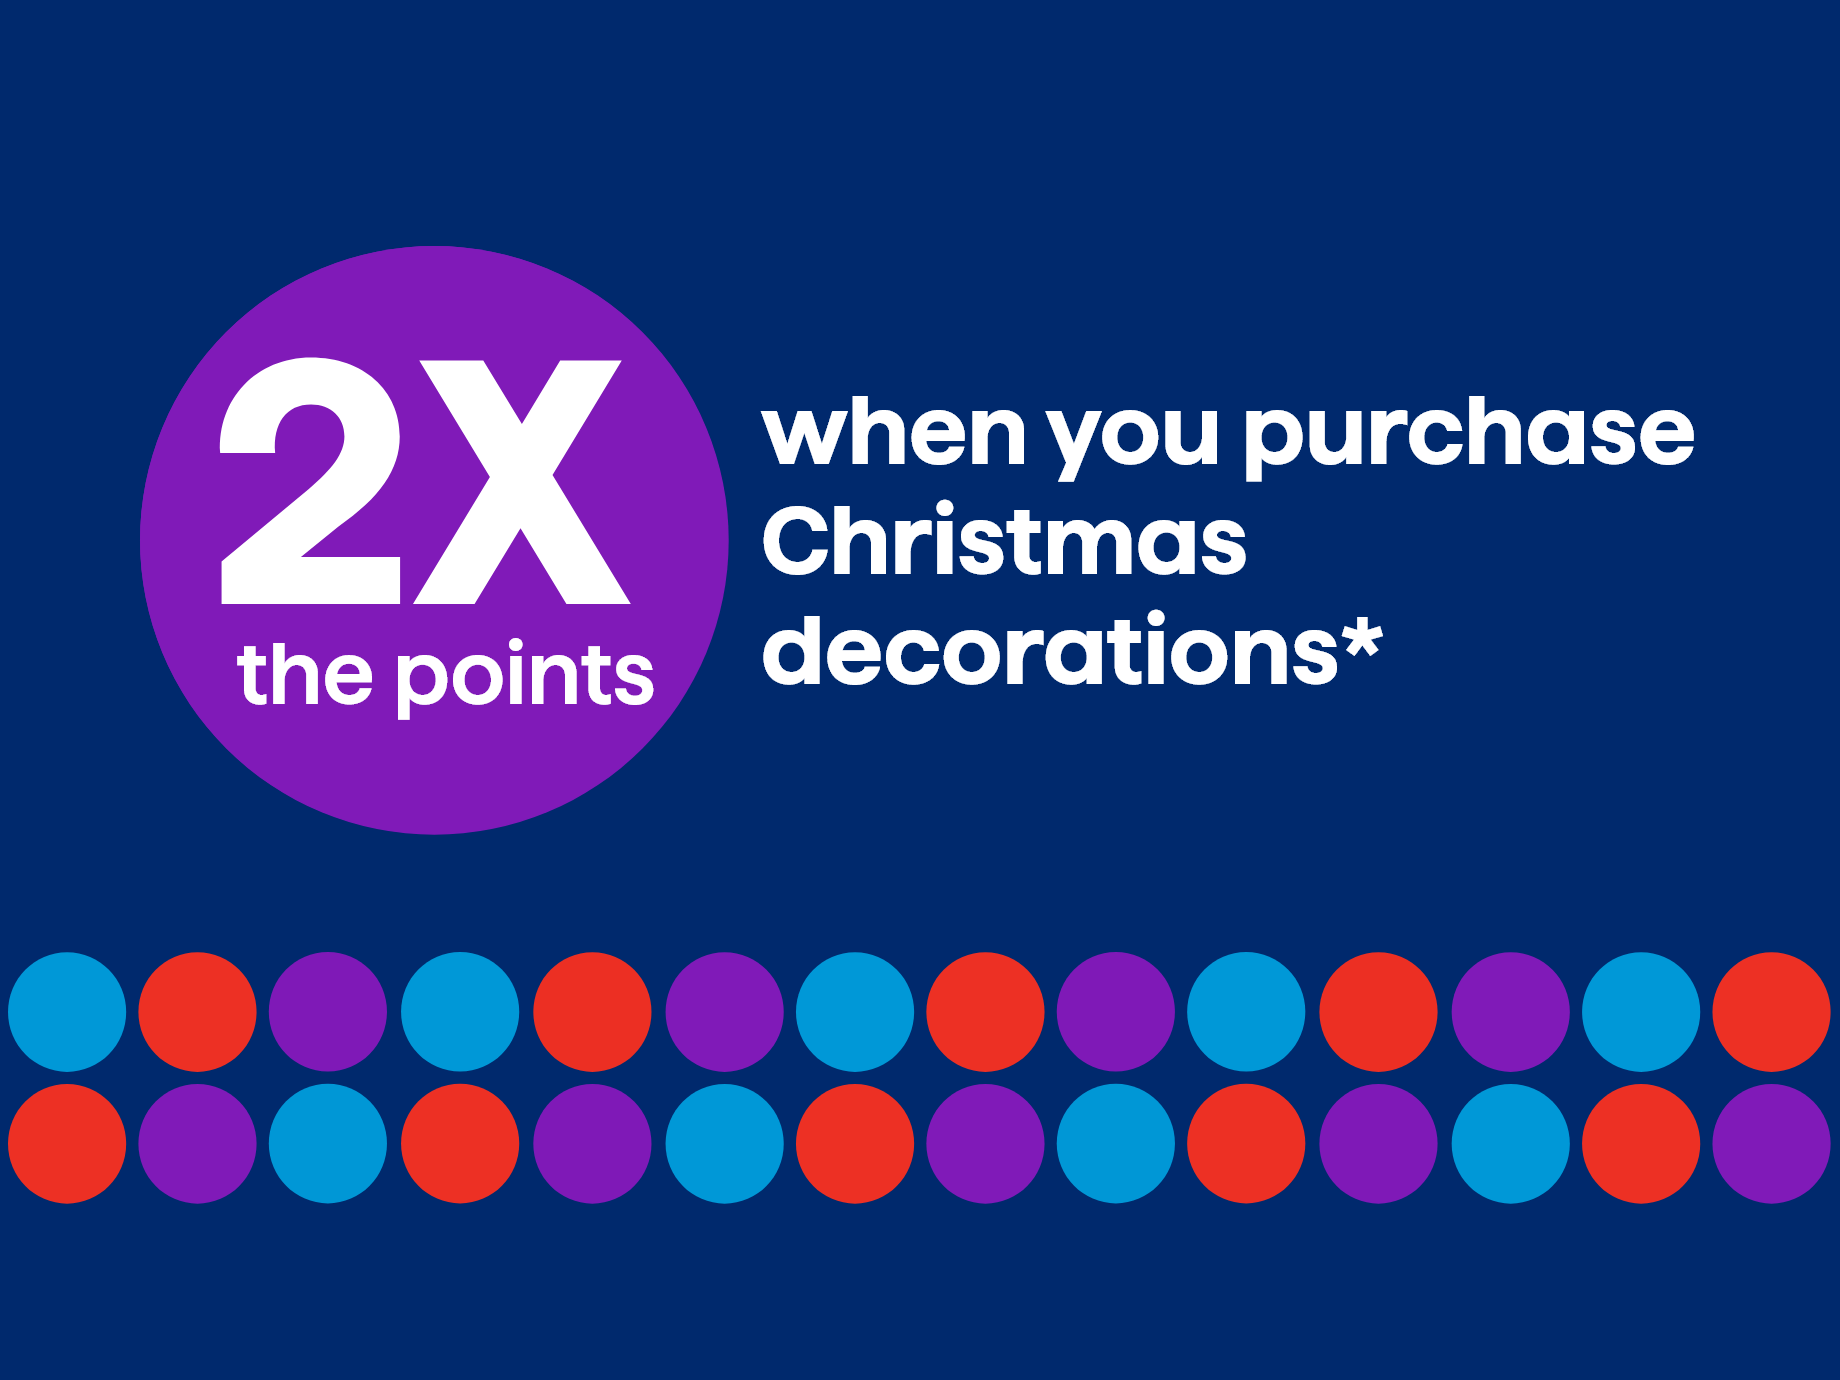 Get 2x the points when you purchase Christmas decorations*